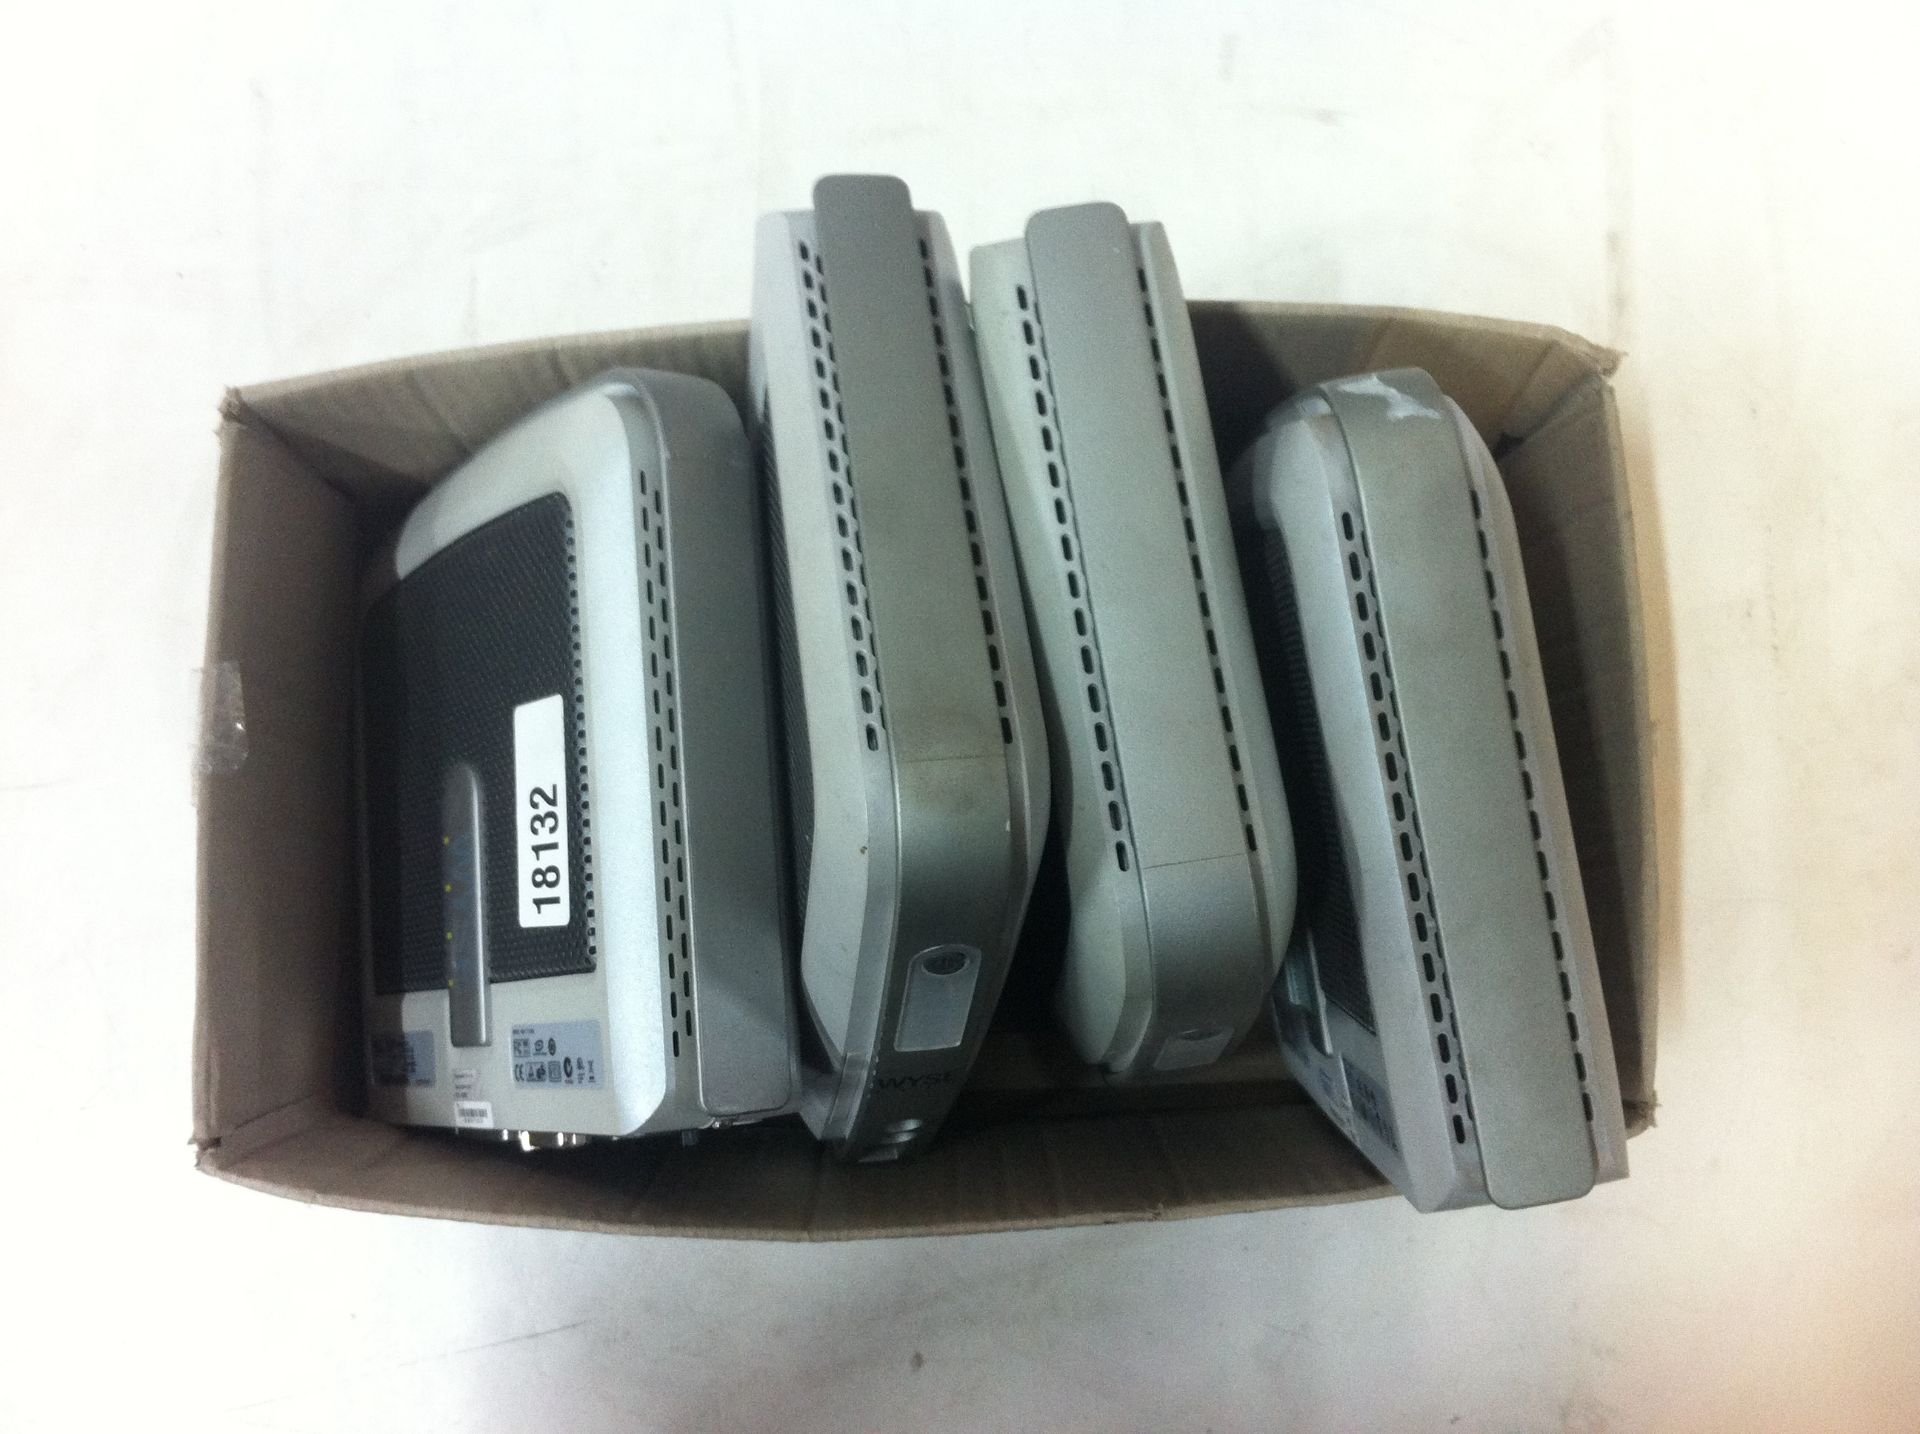 4 x Wyse Thin Clients